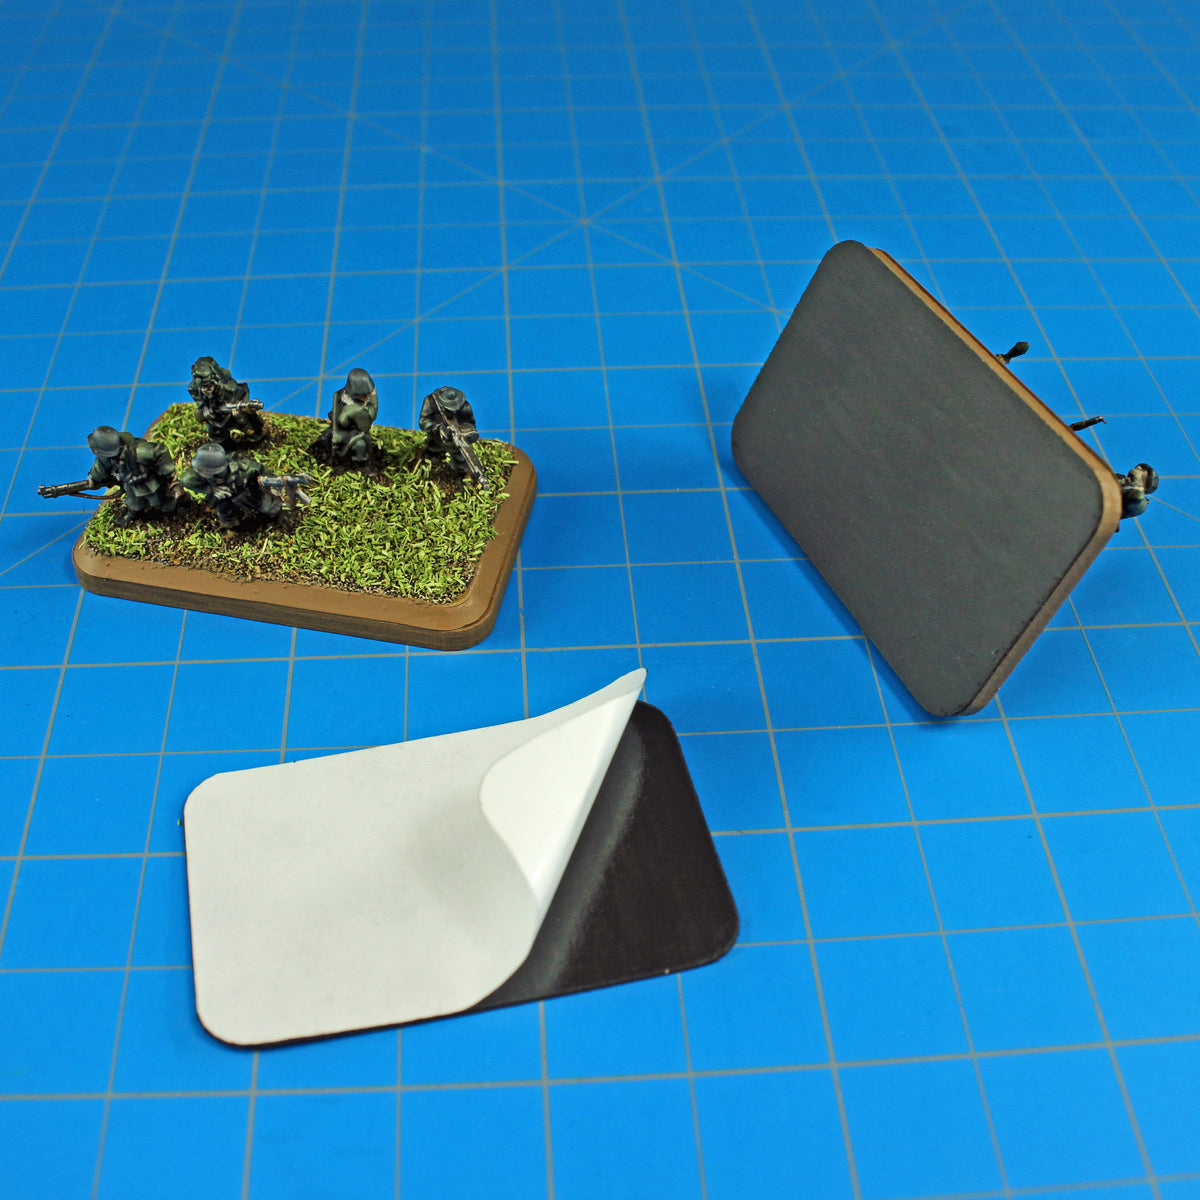 Rounded Corners on Miniature Bases